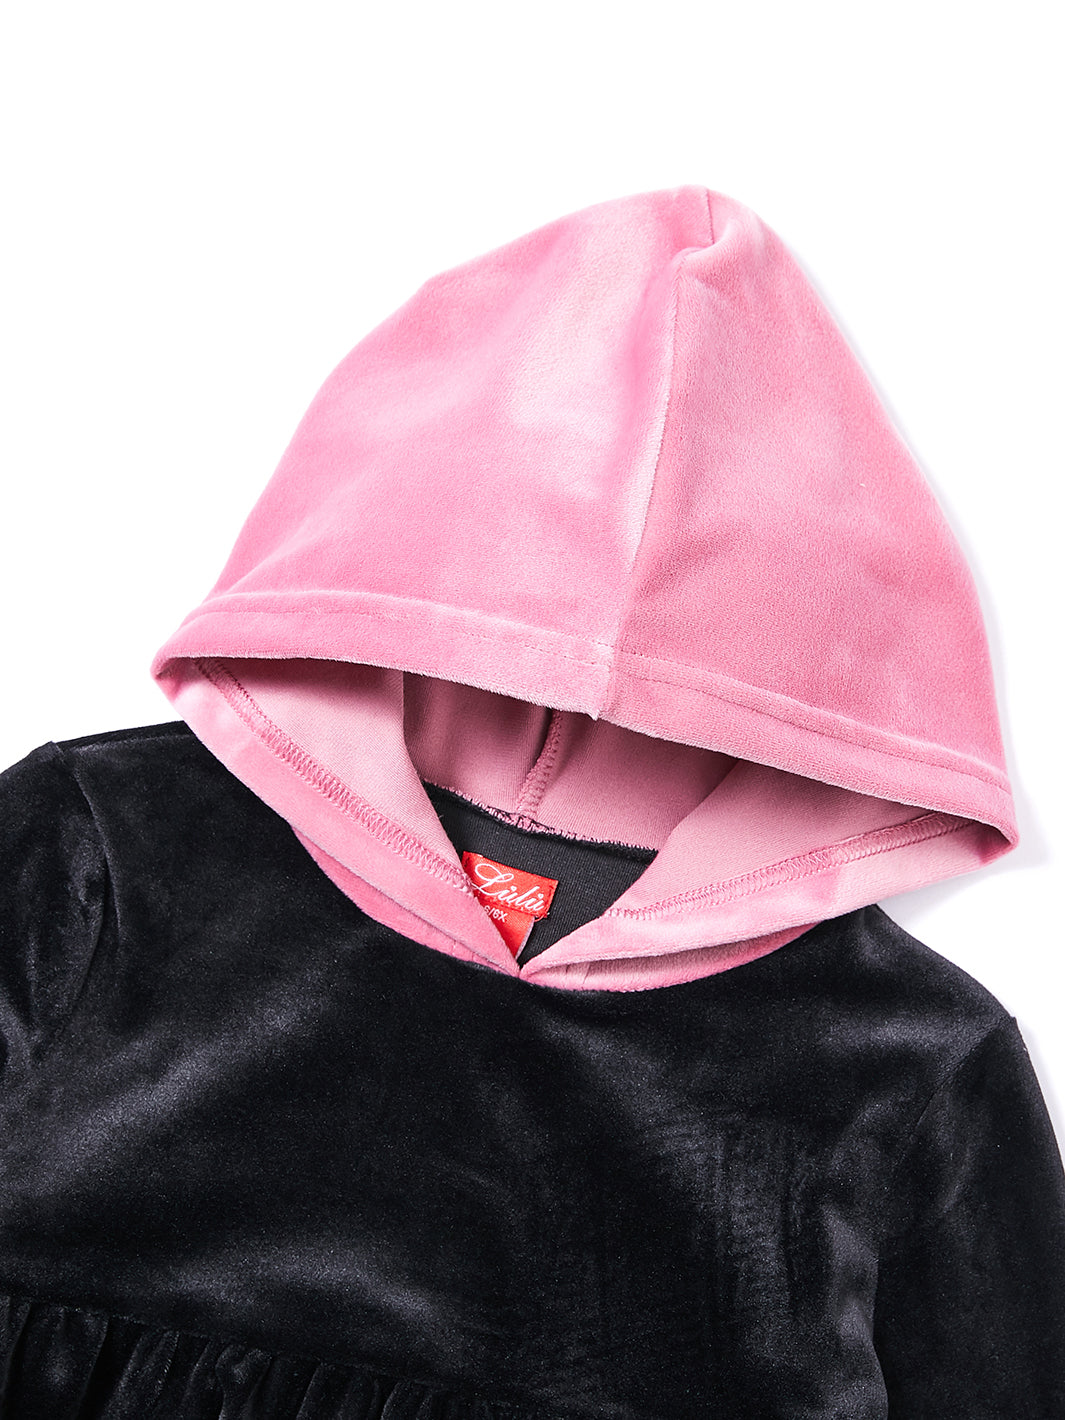 Tiered Hooded Top Velour